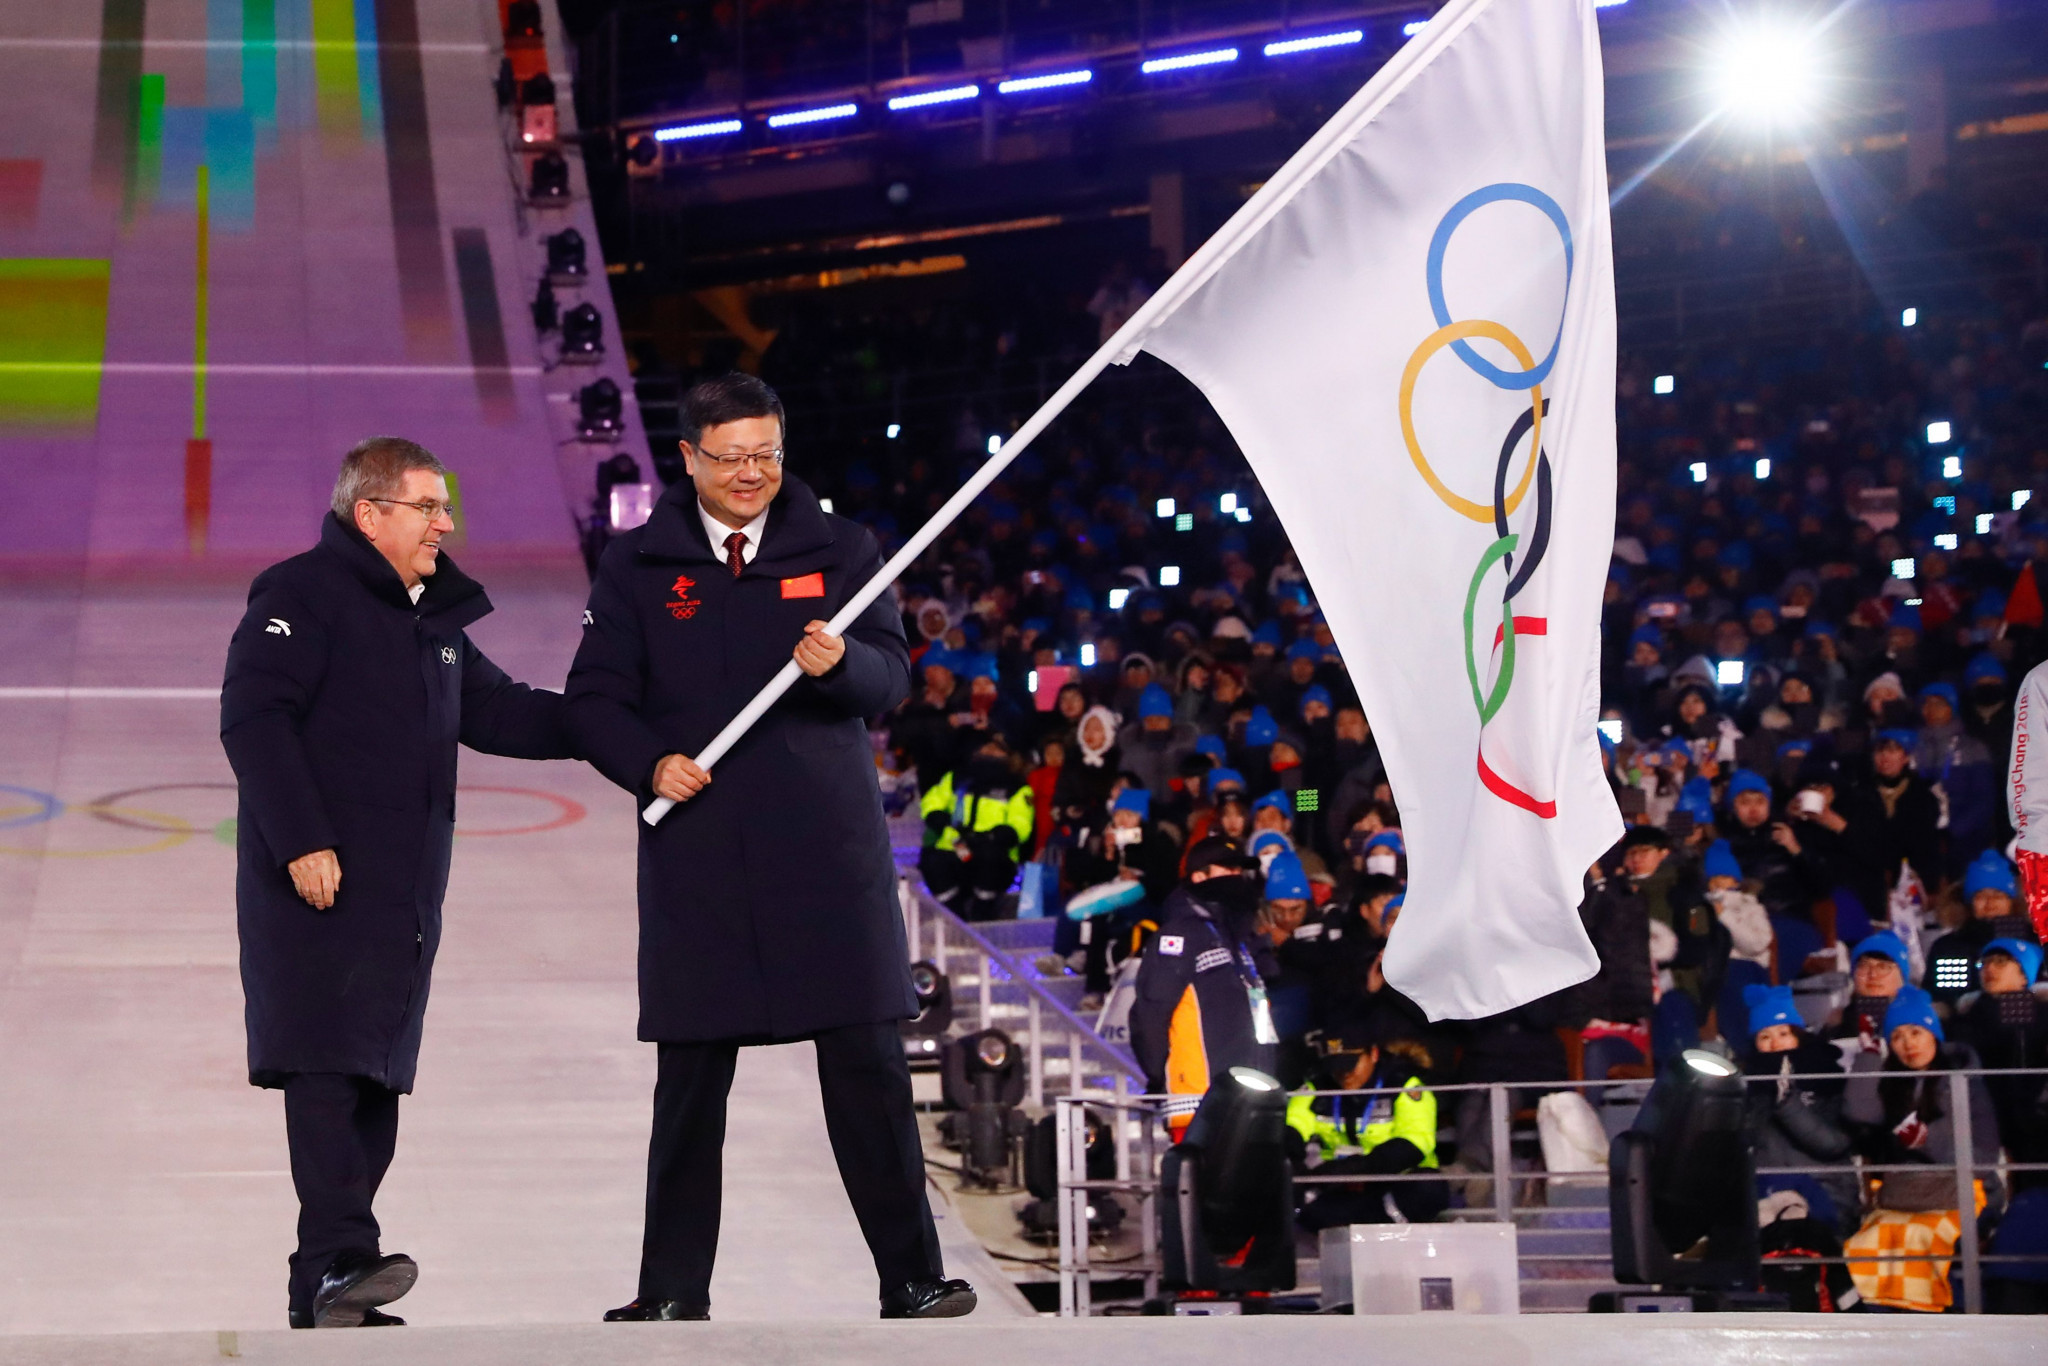 Beijing 2022 ready to step up preparations with hosting of Pyeongchang 2018 debrief